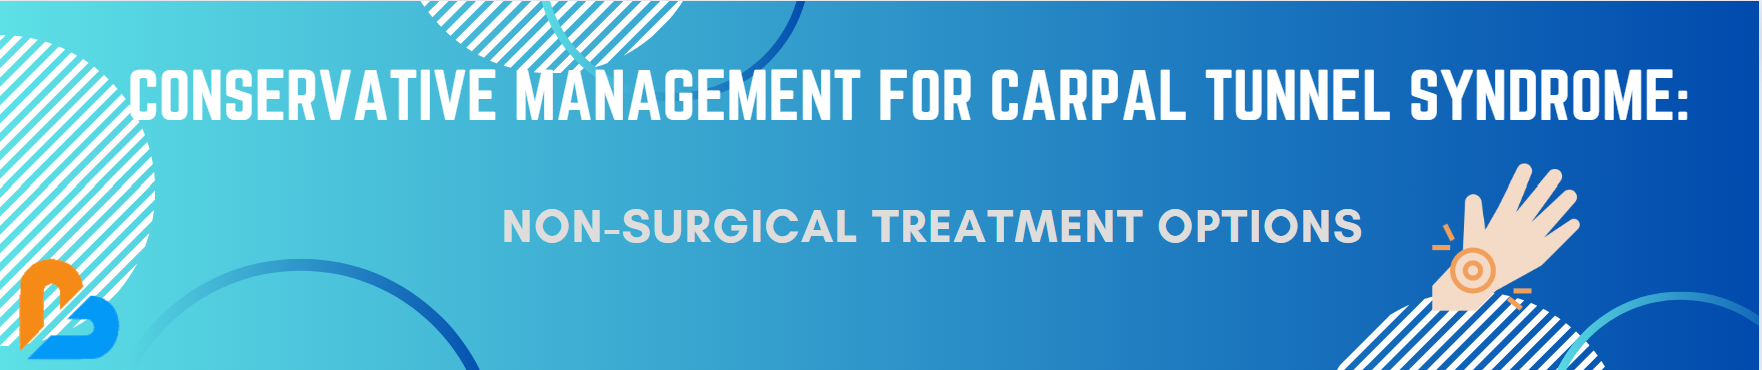 Conservative Management for Carpal Tunnel Syndrome: Non-Surgical Treatment Options